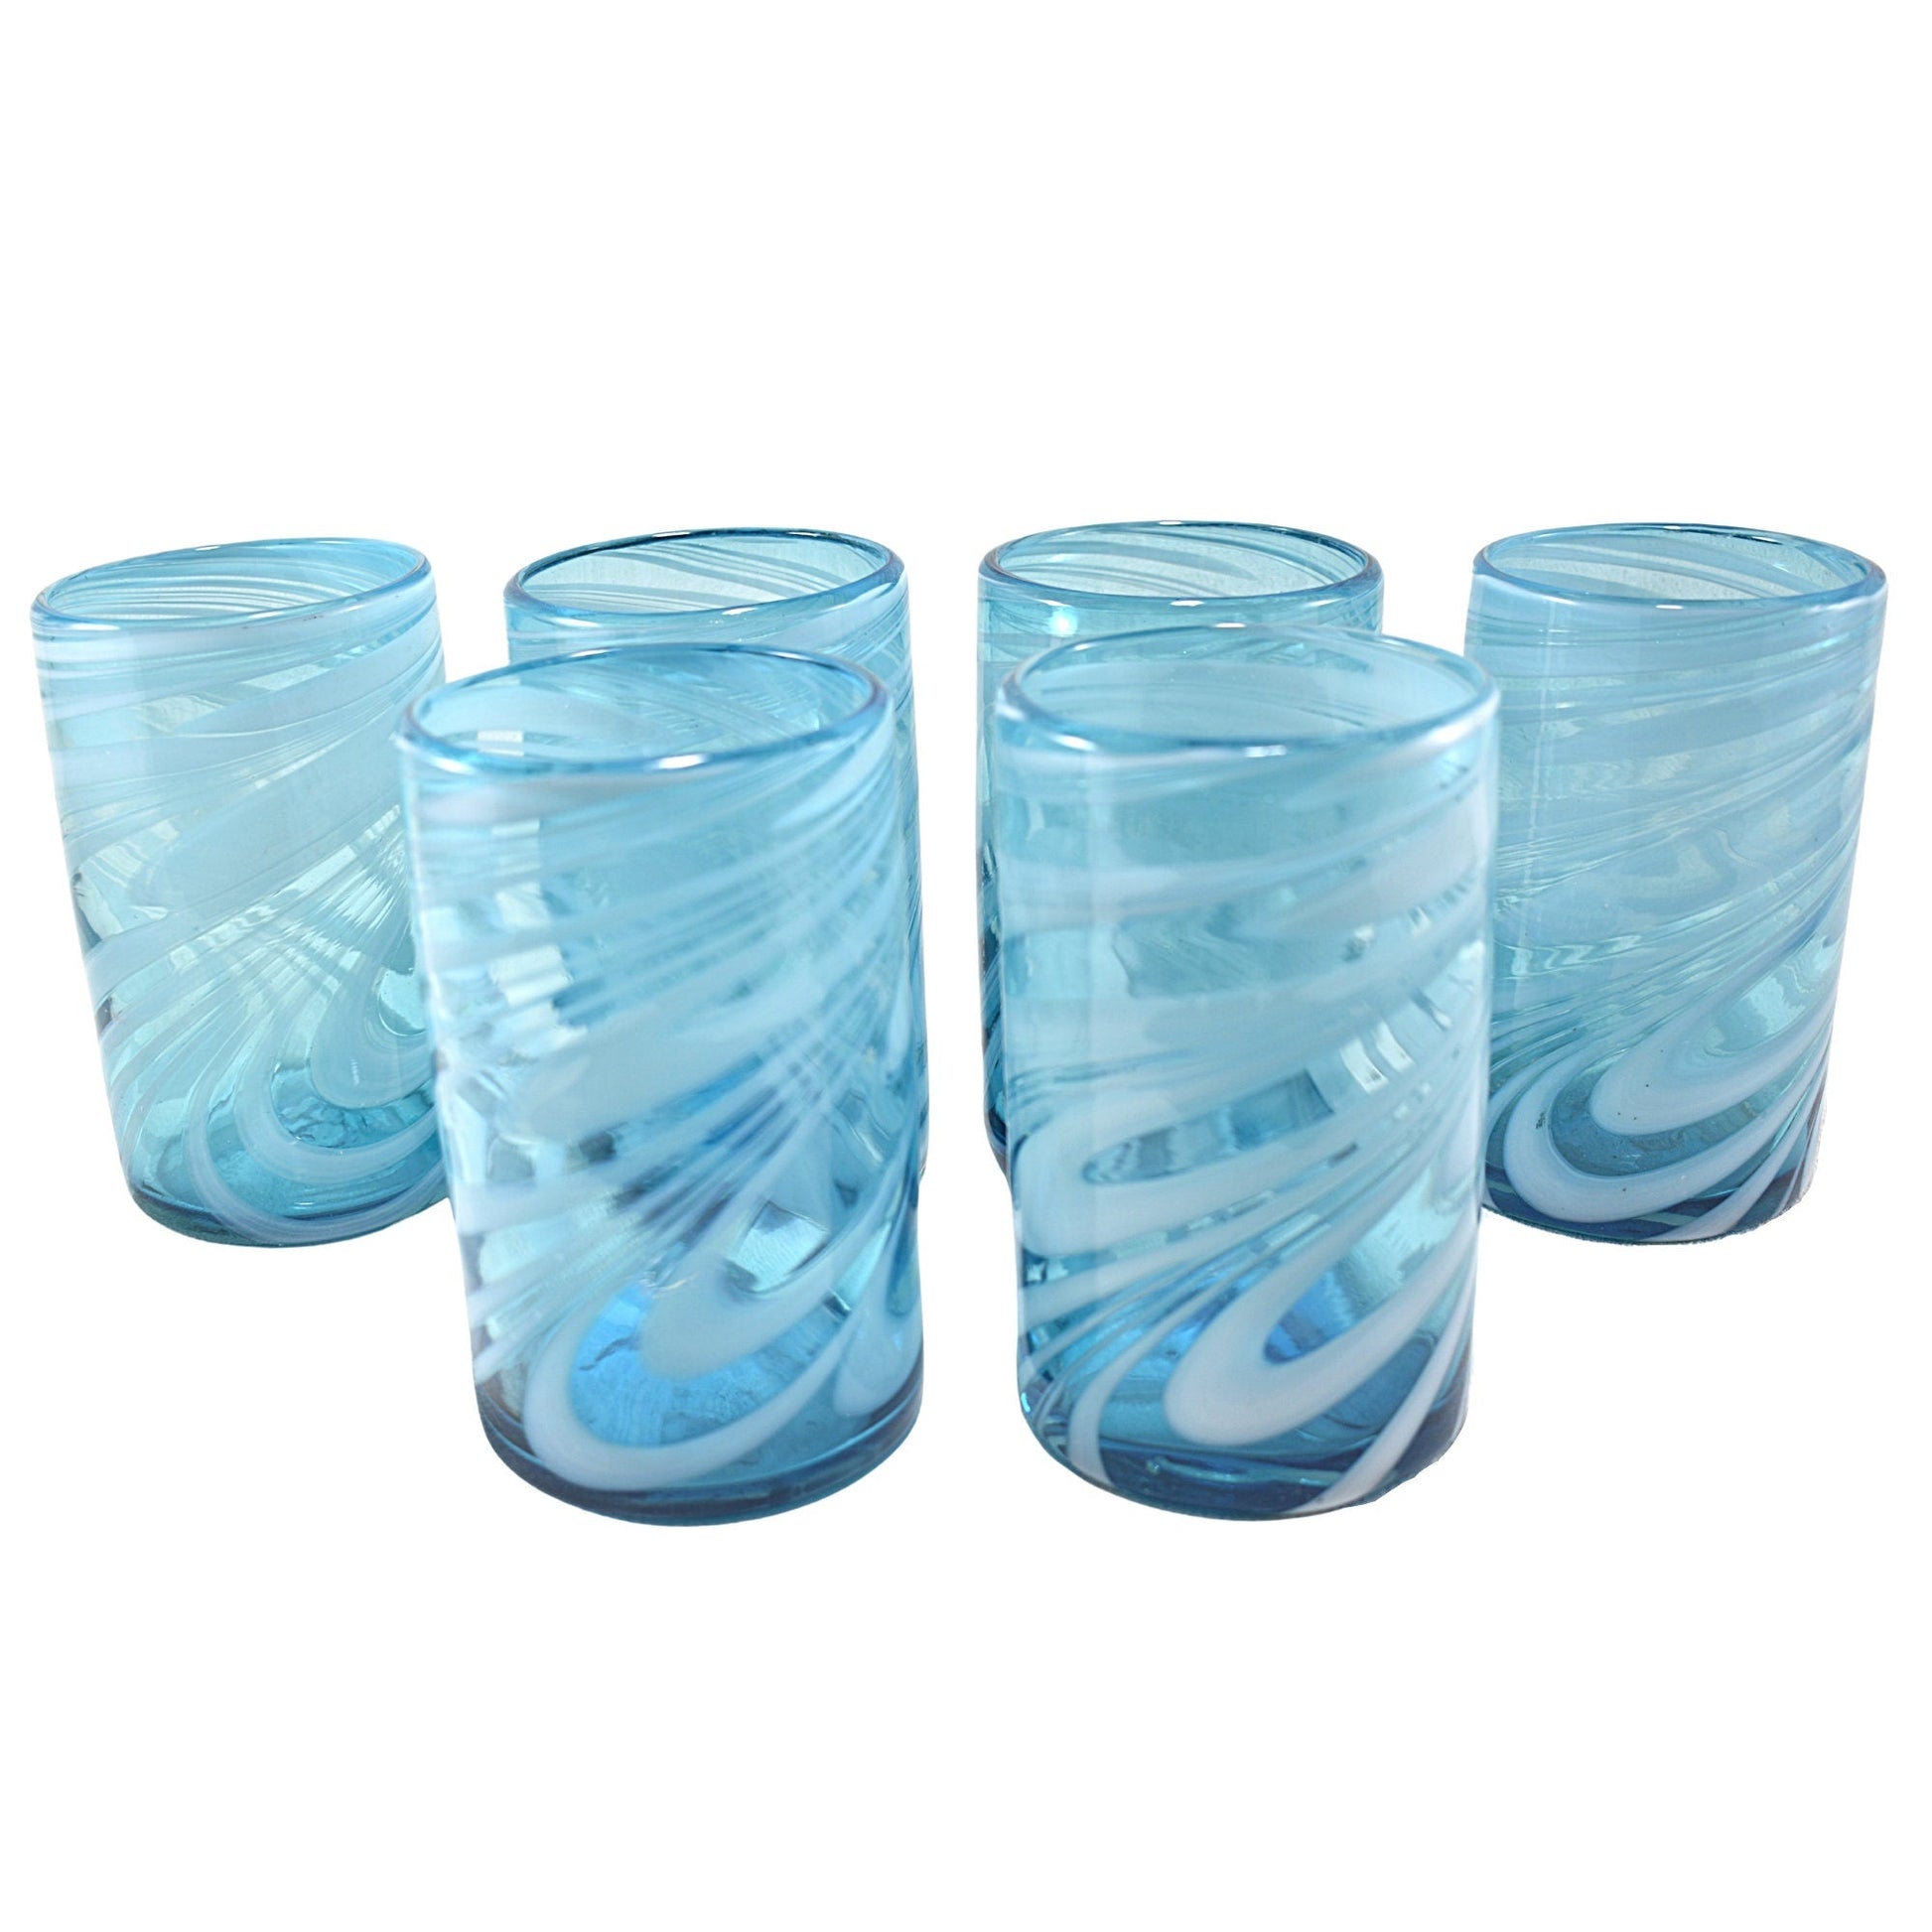 MAREY Mexican Drinking Glasses, Artisan Crafted, Blown Glass